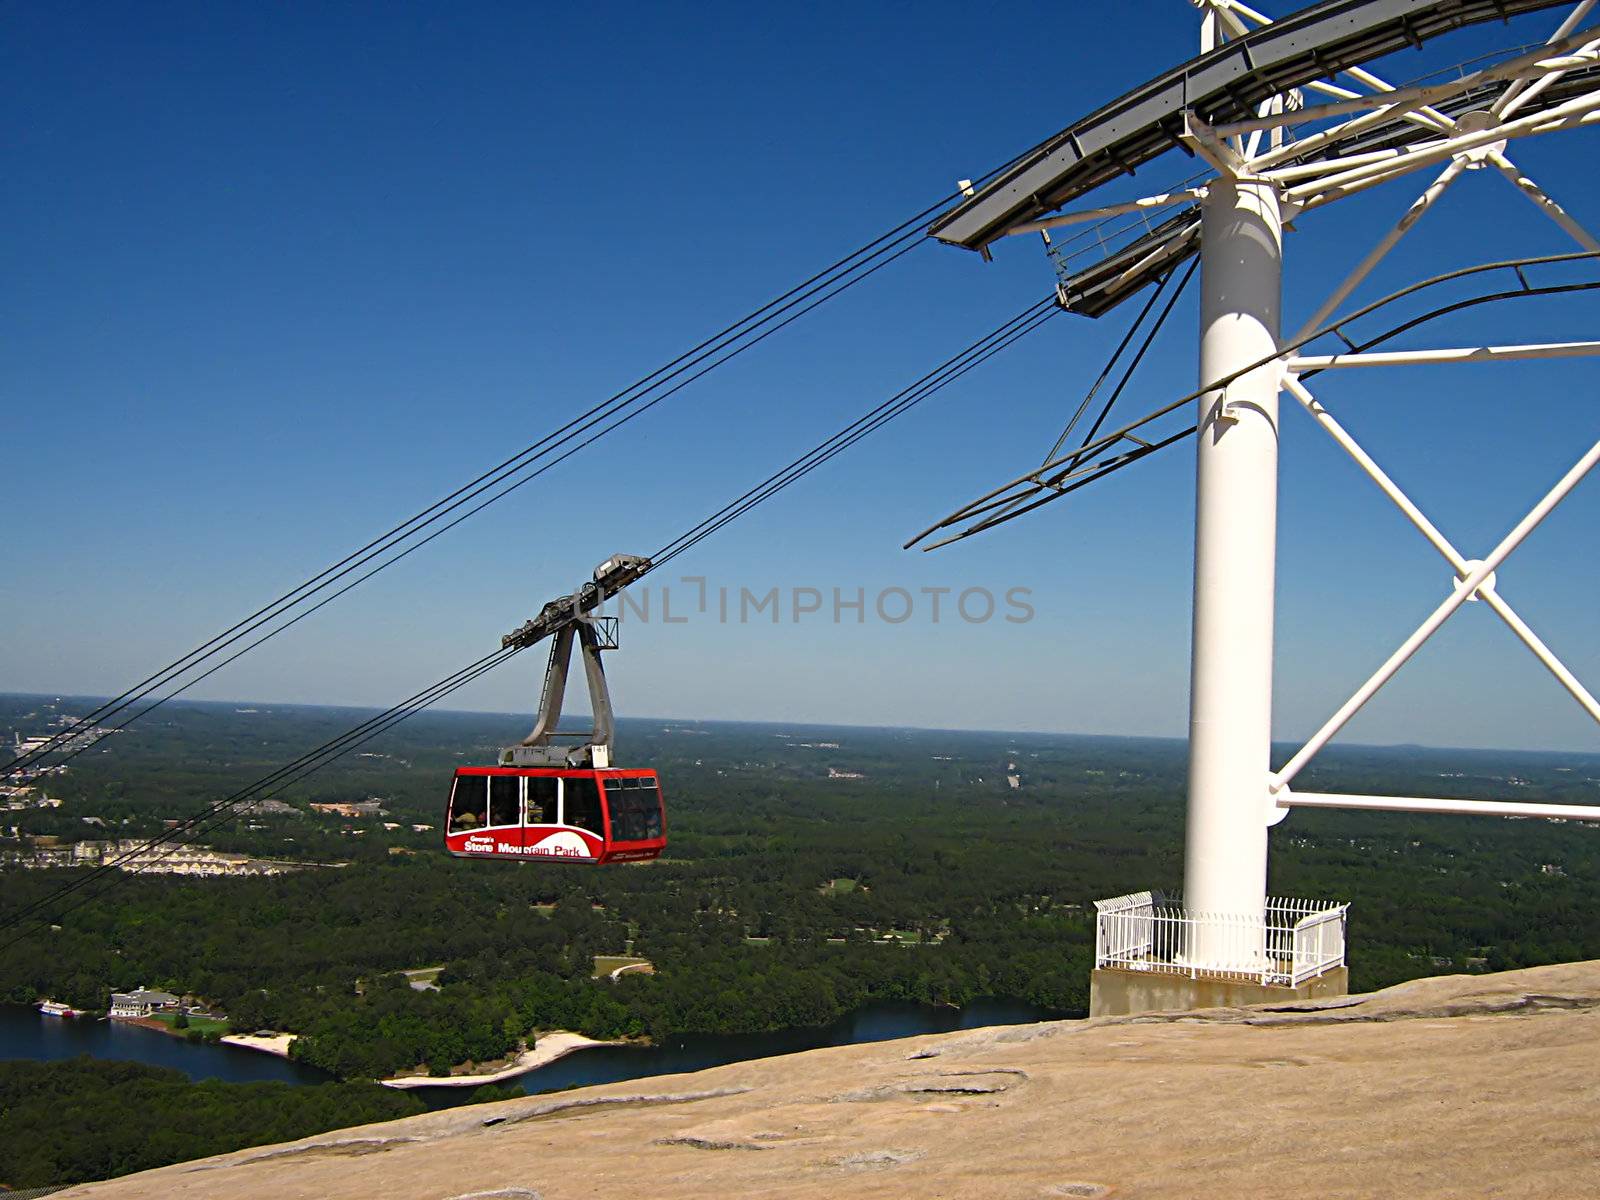 A photograph of a cable car in action.